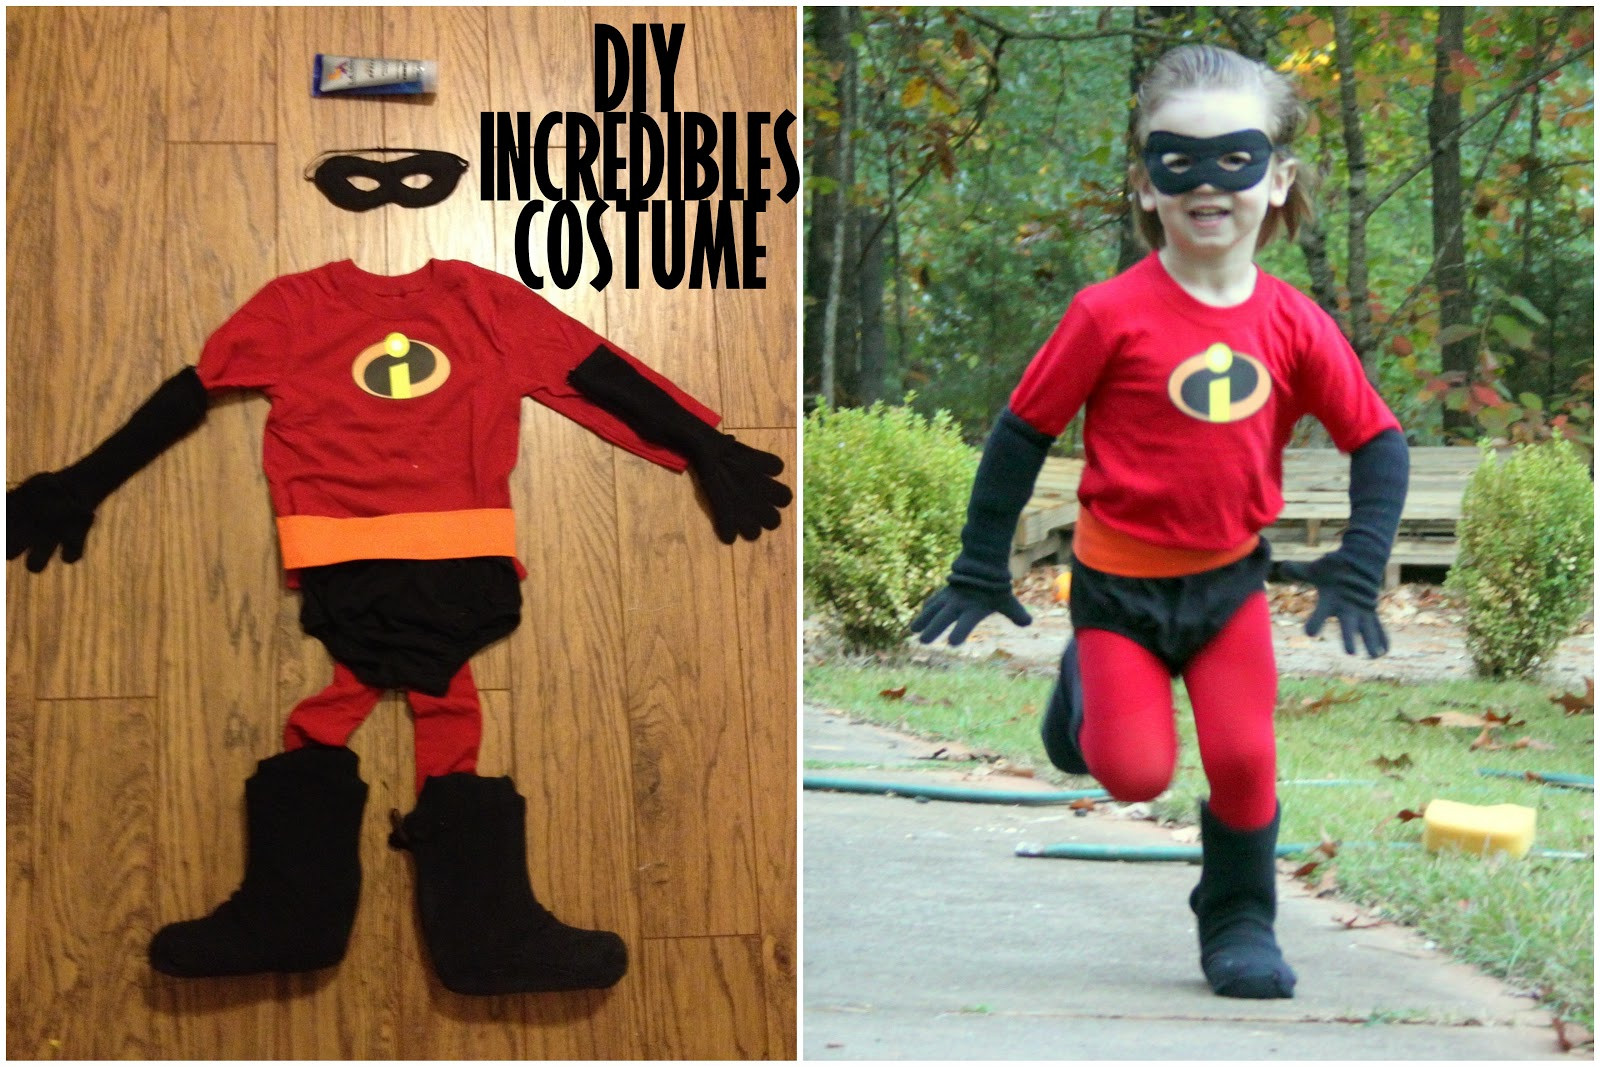 DIY Incredible Costume
 Put Up Your Dukes an incredible costume